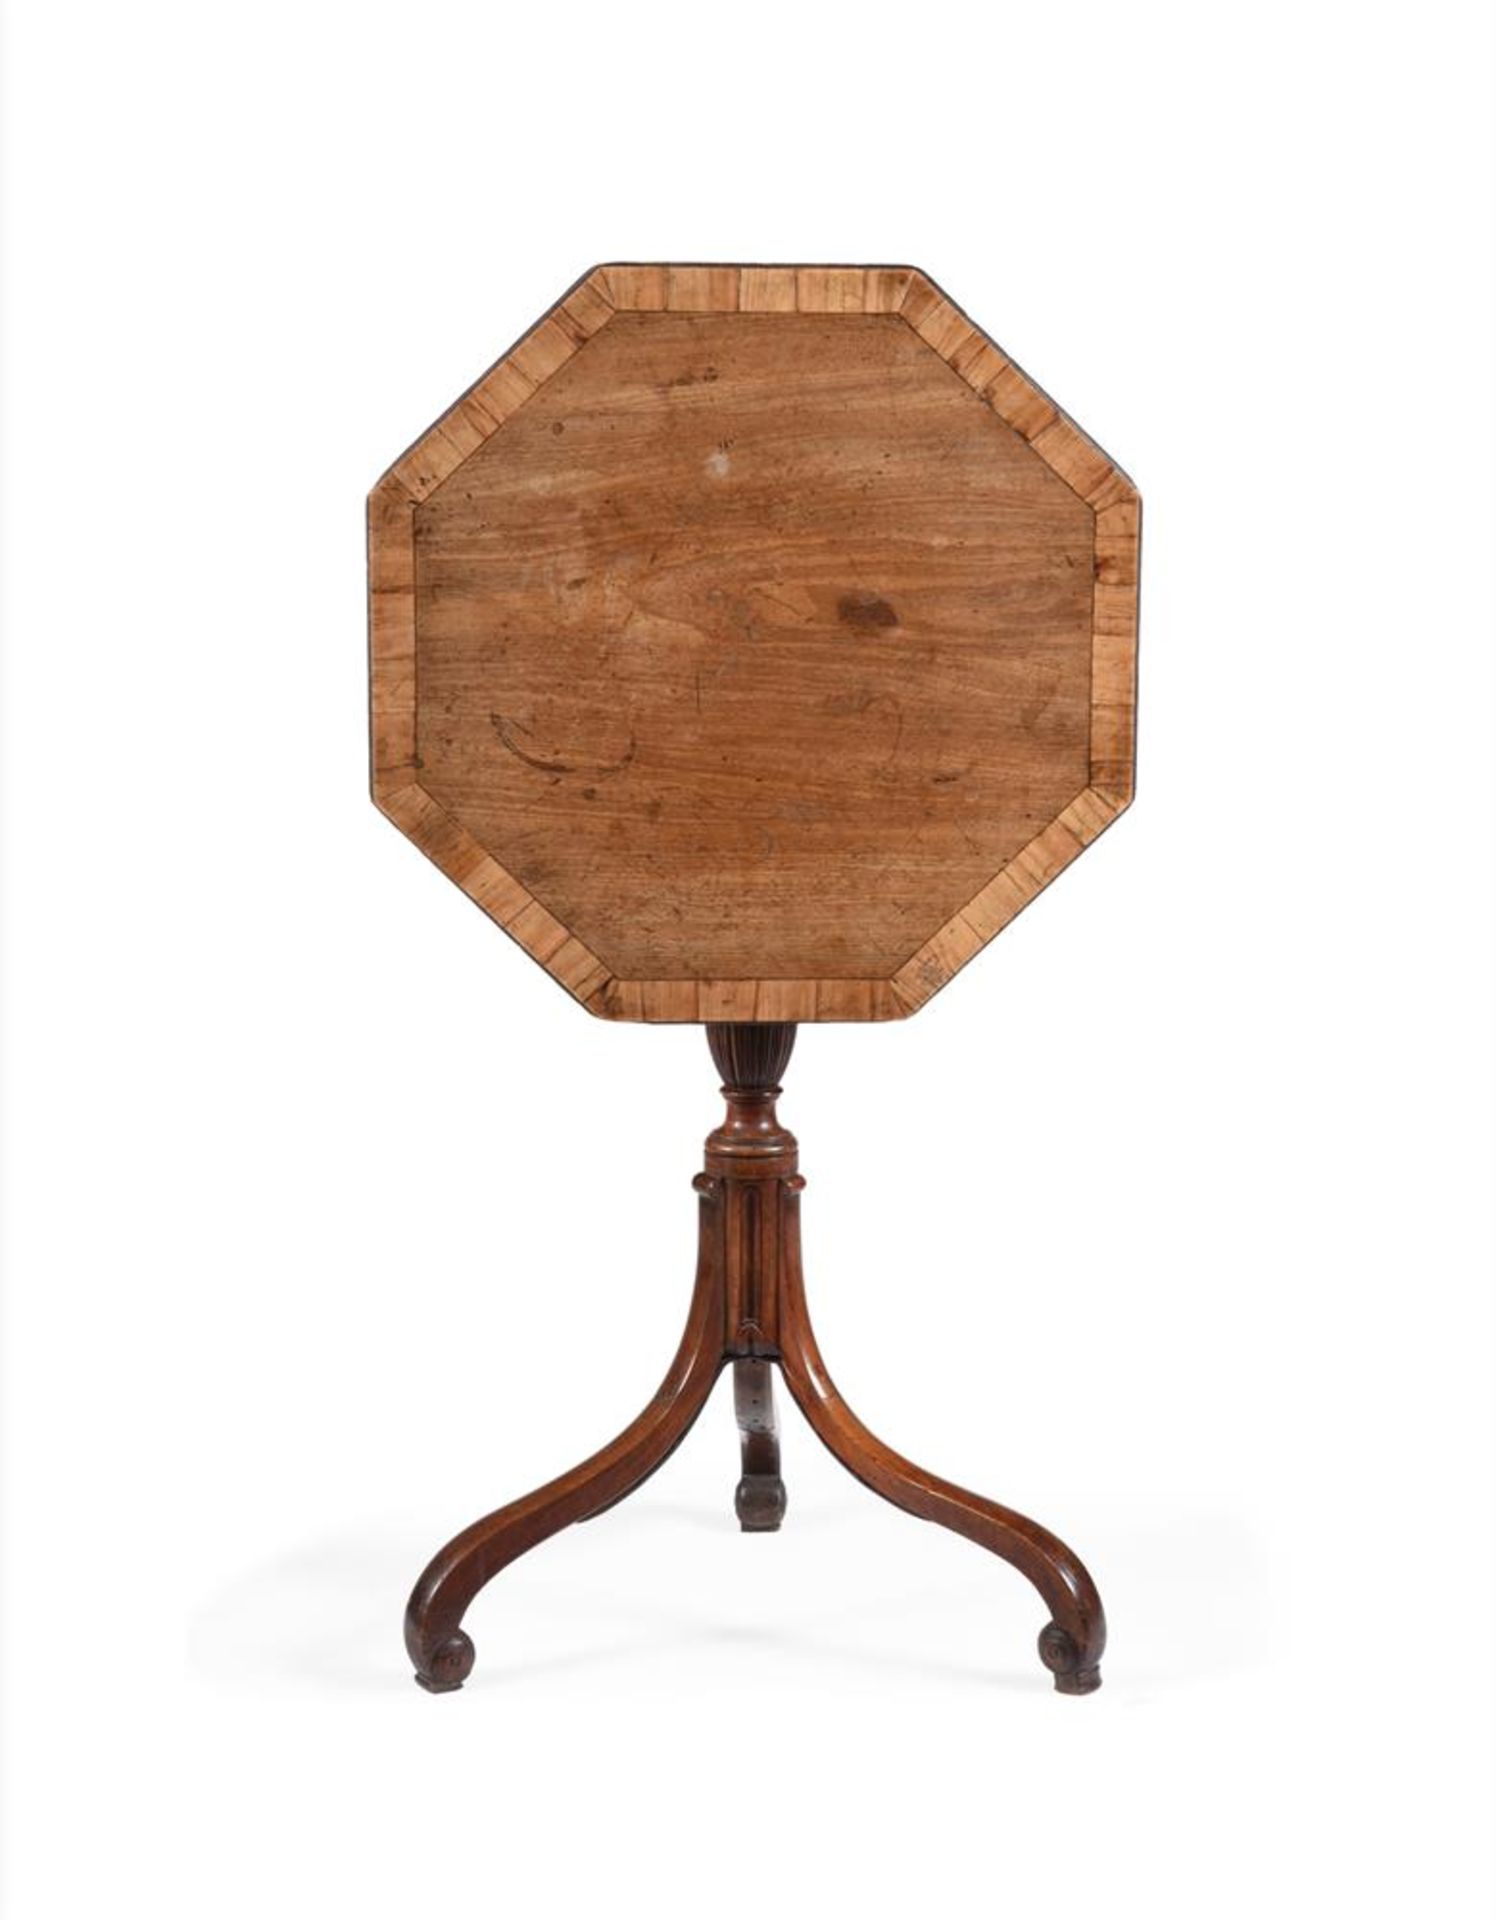 A GEORGE III MAHOGANY AND CROSSBANDED TRIPOD TABLE, IN THE MANNER OF THOMAS CHIPPENDALE, CIRCA 1790 - Image 2 of 4